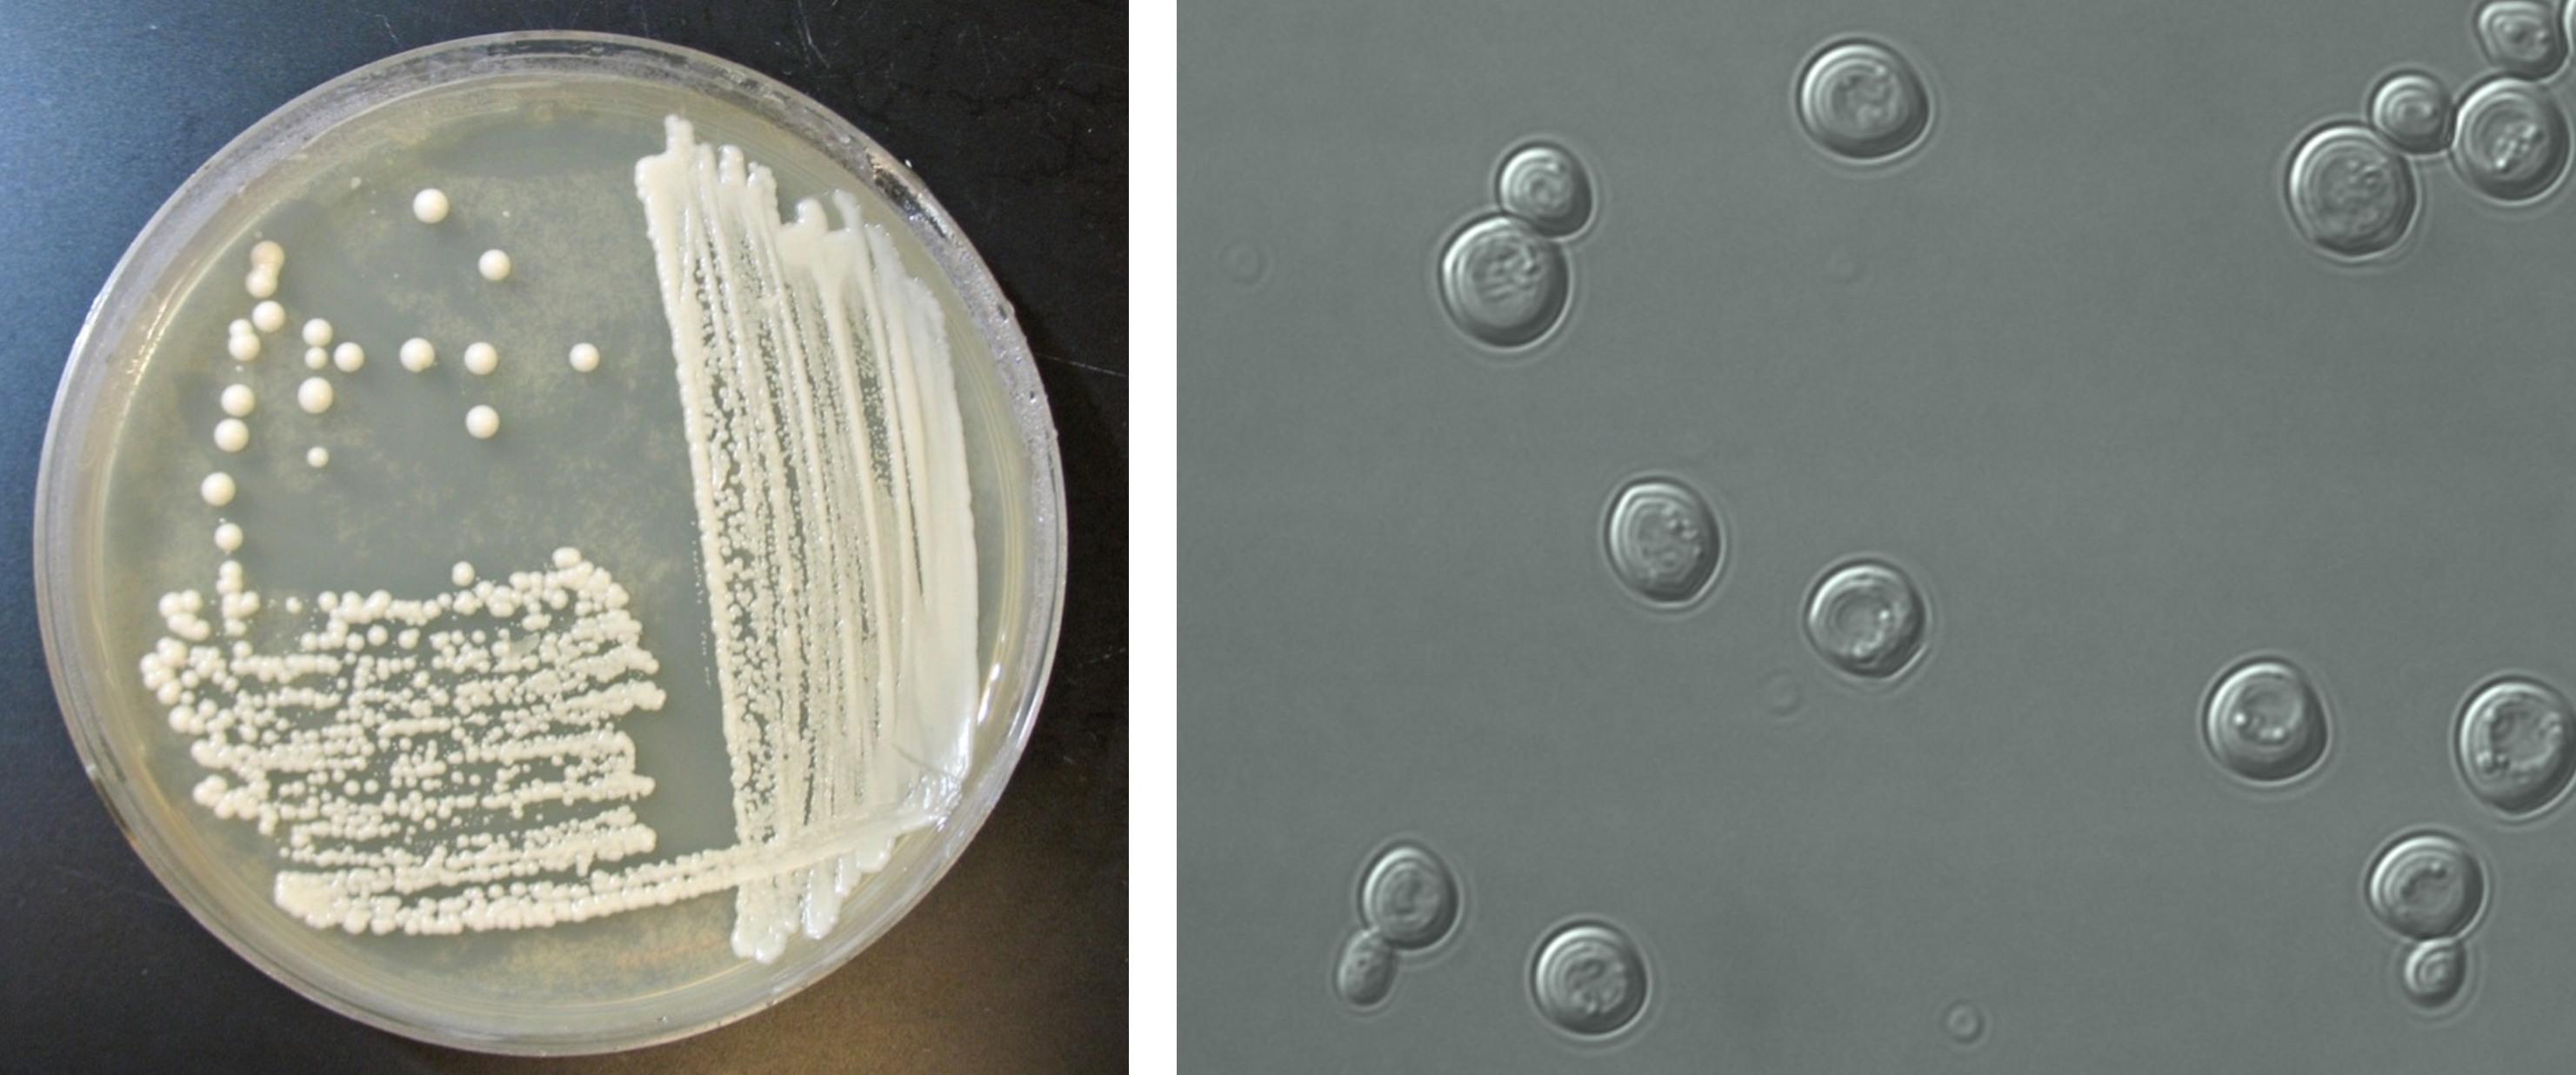 yeast growing on a petri plate; microscopic image of yeast cells